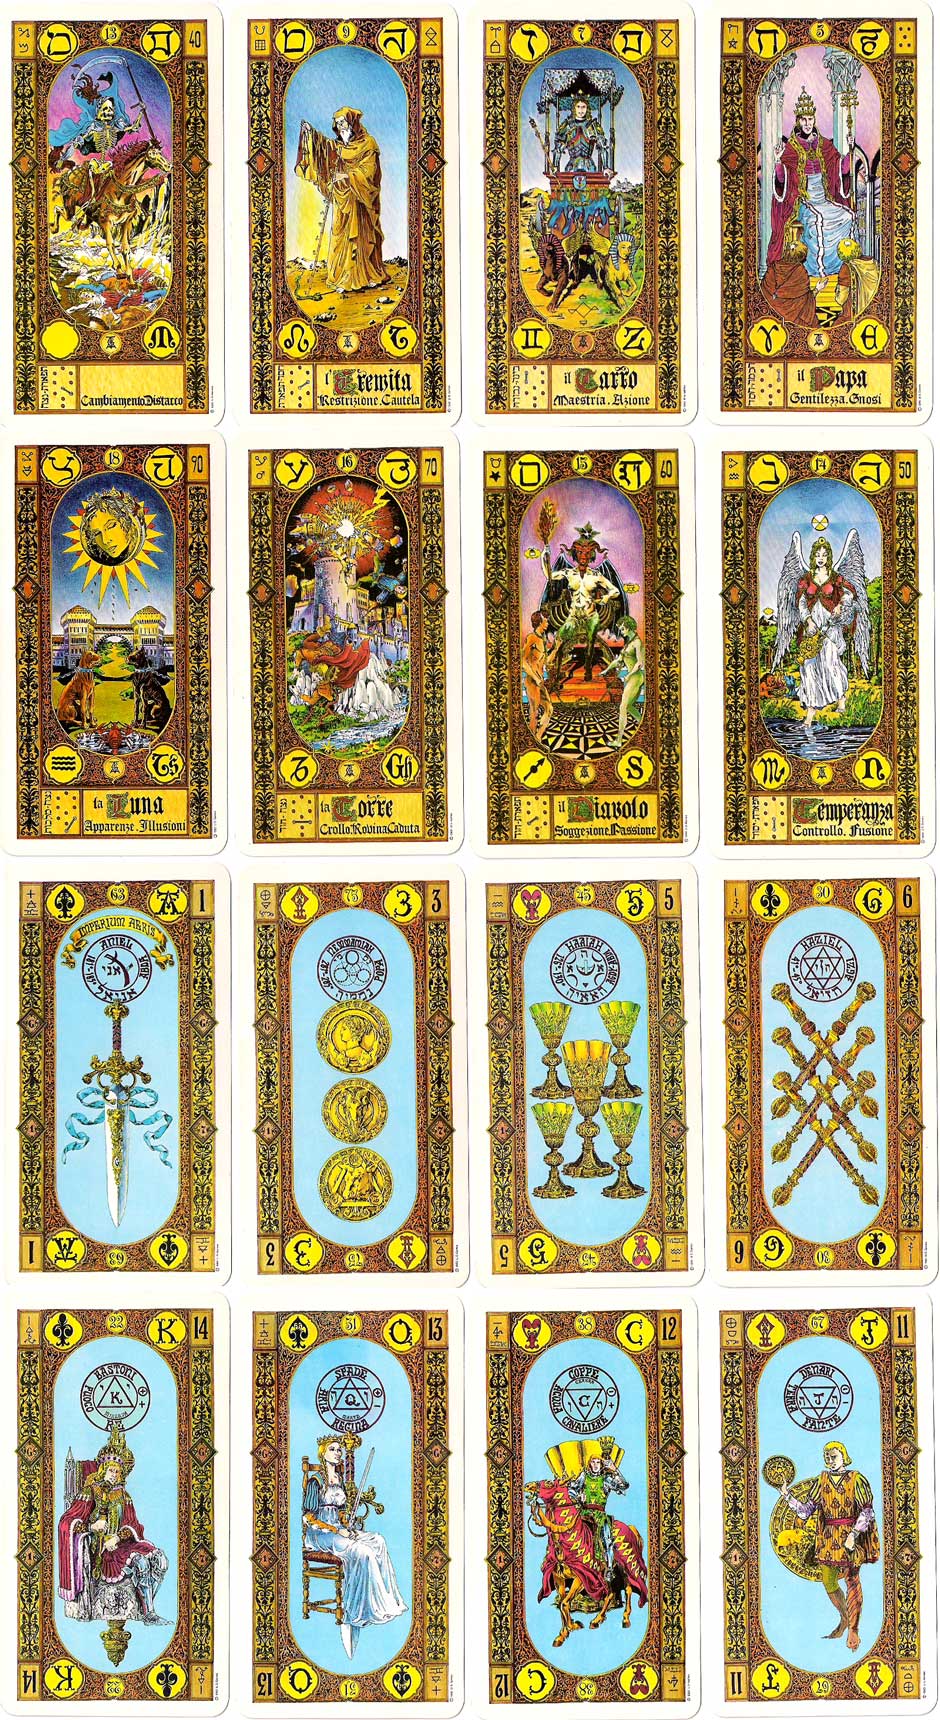 “Stairs of Gold” Tarot cards designed by Giorgio Tavaglione, 1979